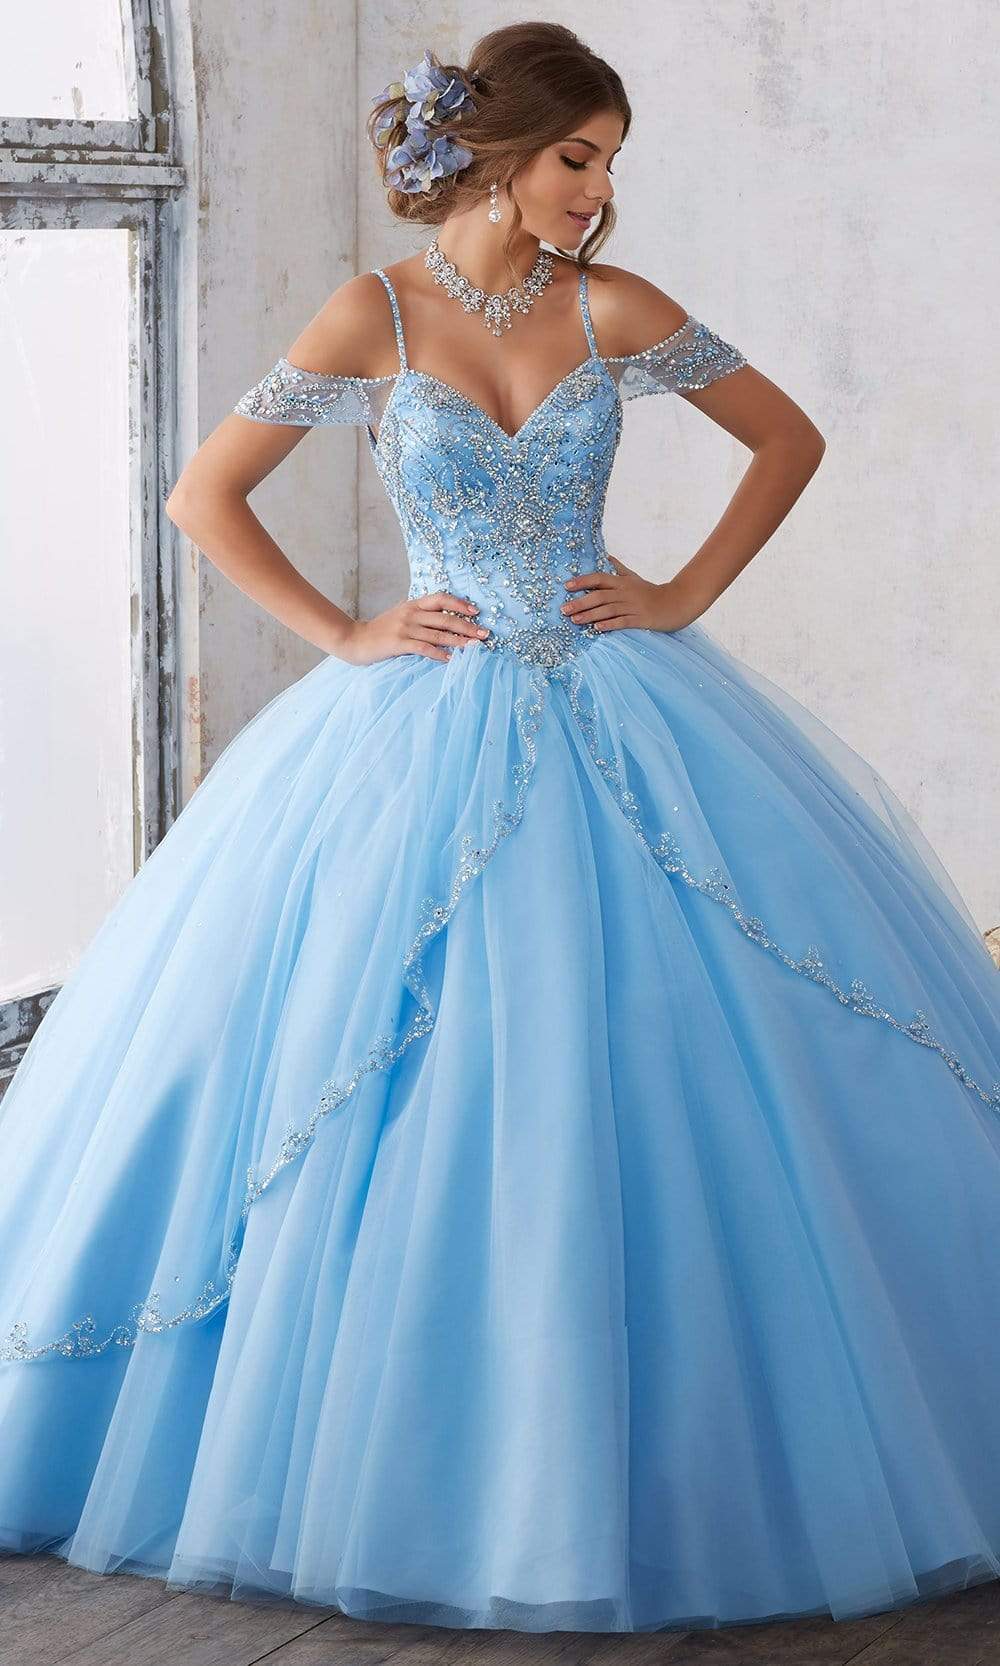 Vizcaya by Mori Lee - 89135 Jeweled Draped Off Shoulder Ballgown Quinceanera Dresses 00 / Bahama Blue